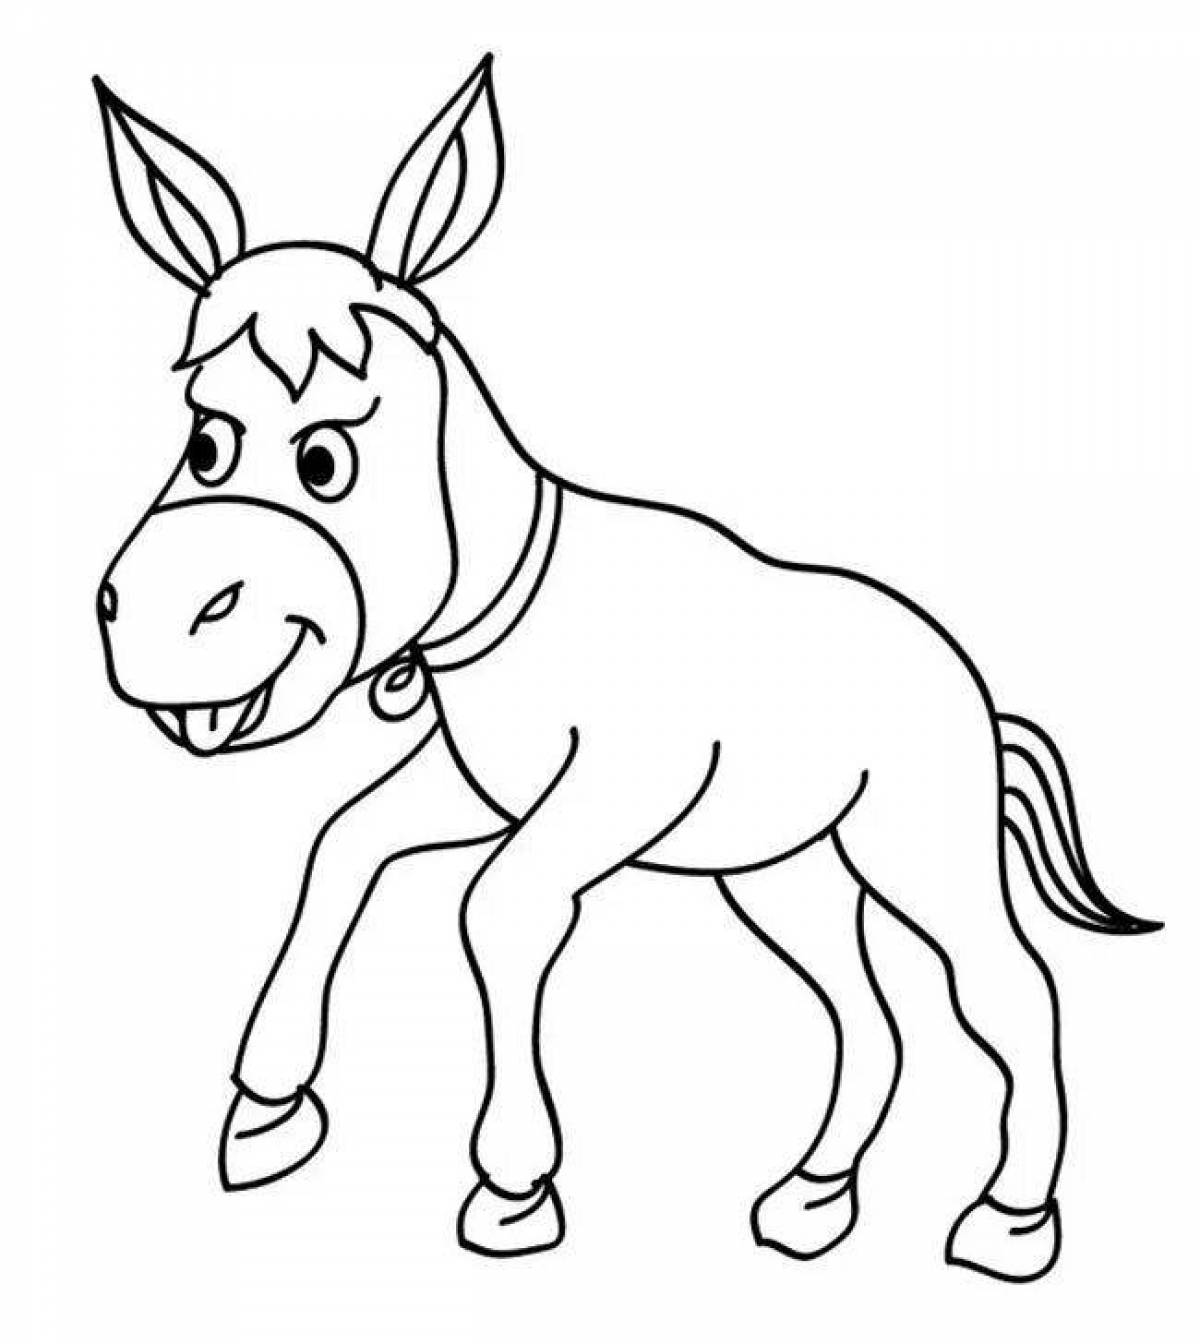 Coloring donkey for kids